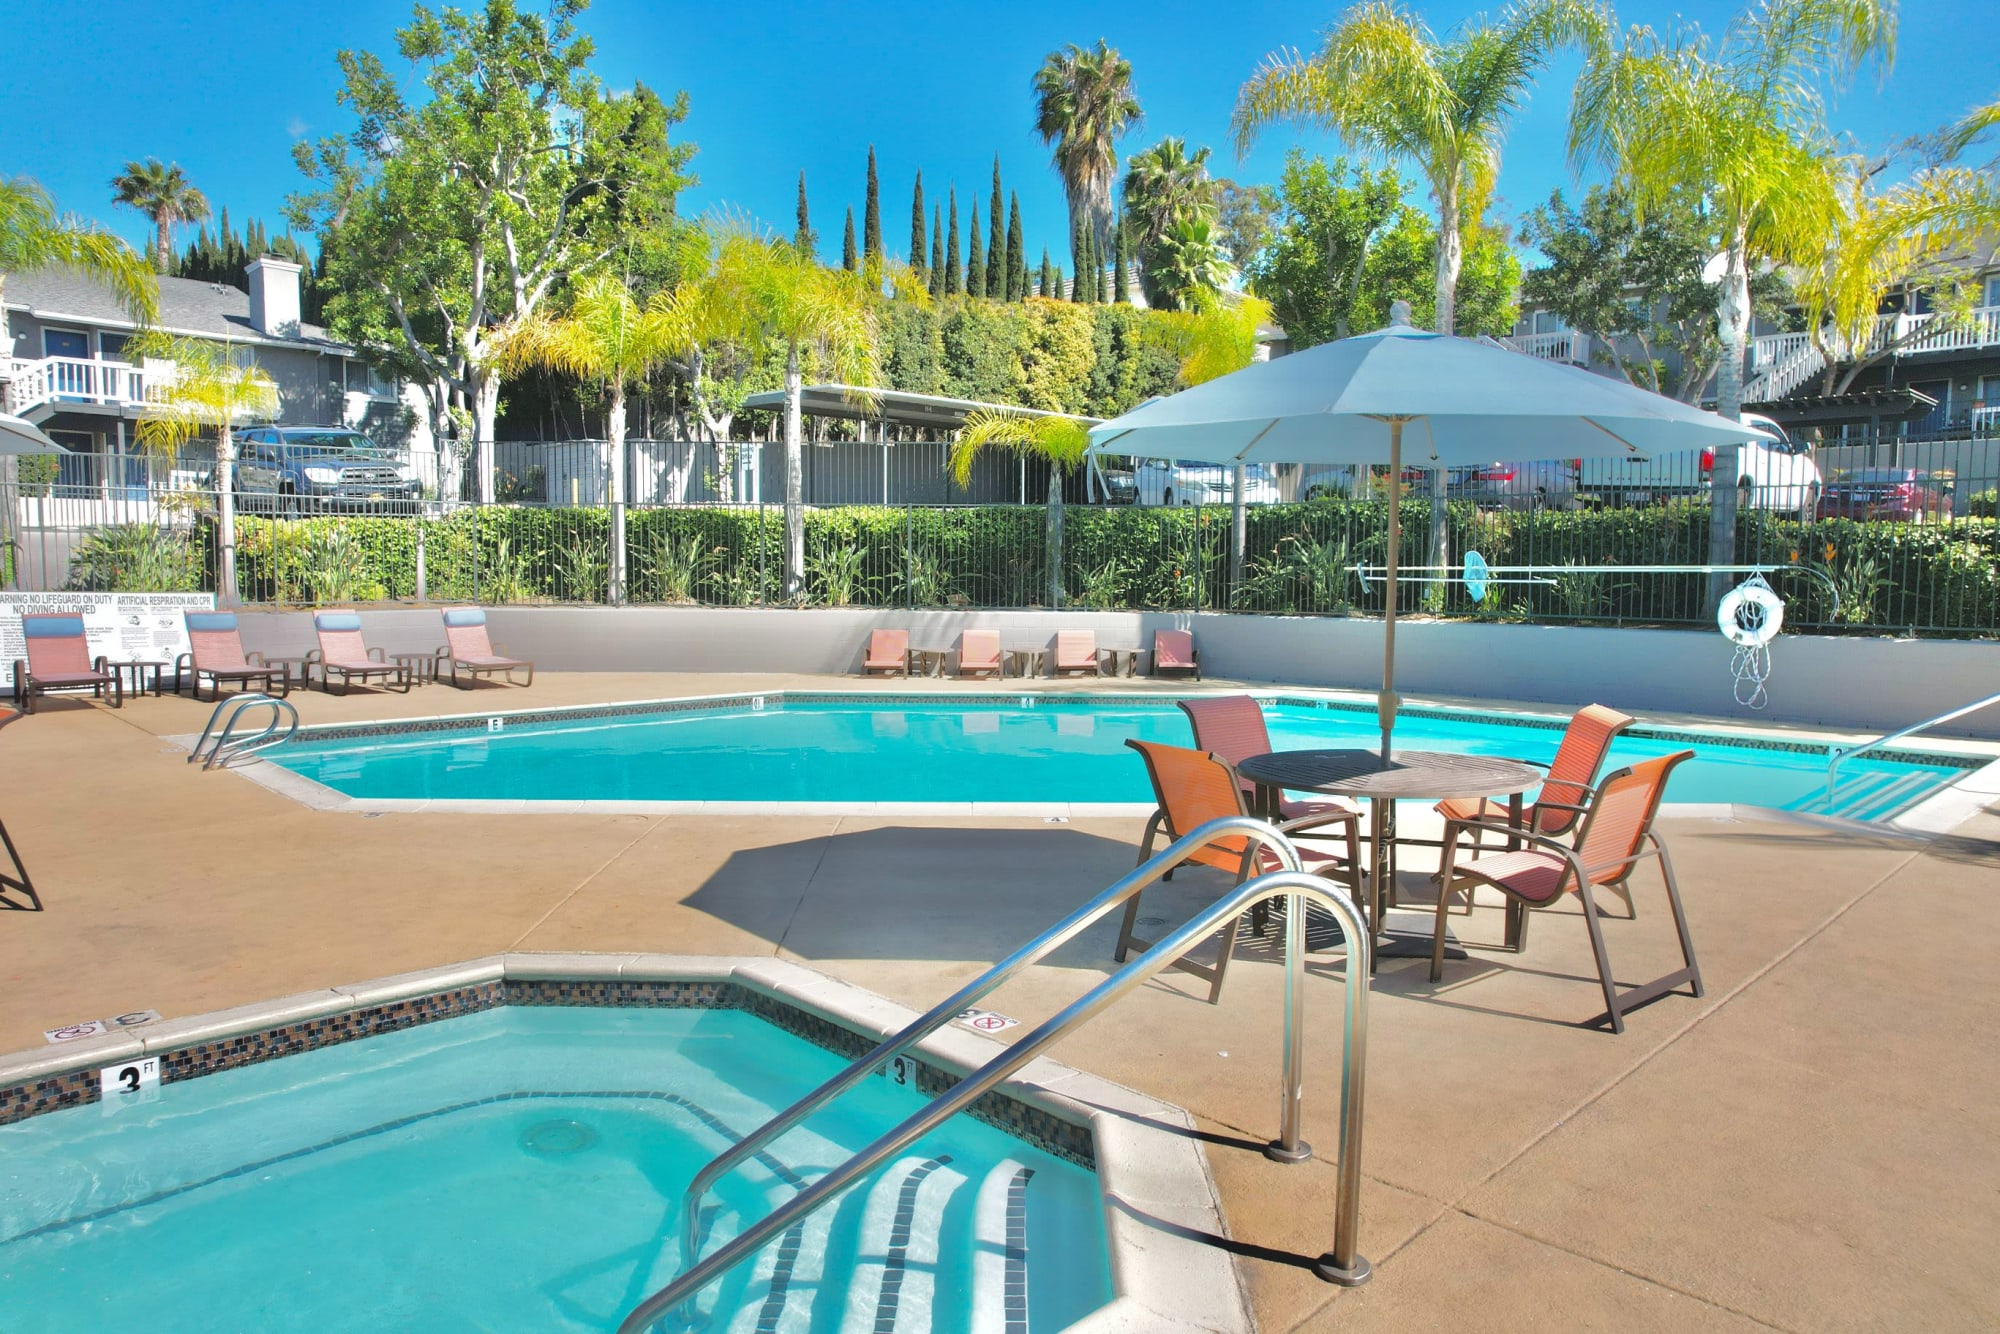 The sparkling swimming pool on a sunny day at Hillside Terrace Apartments in Lemon Grove, California